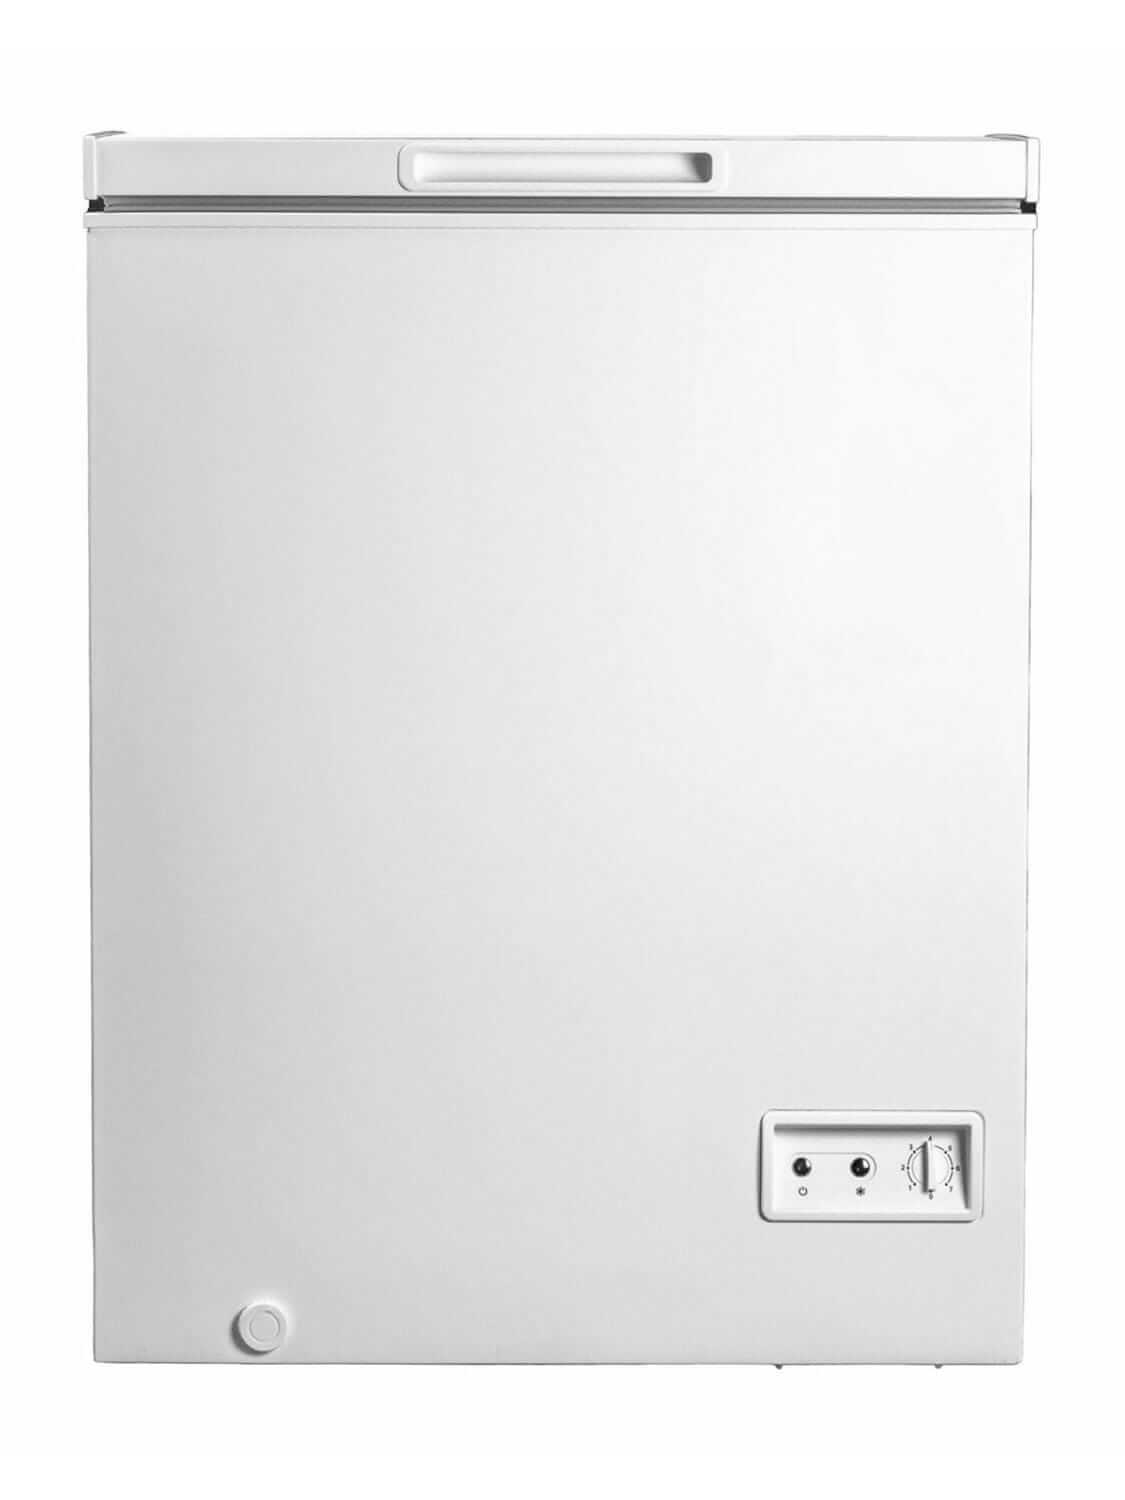 Buy The Danby 5 0 Cu Ft Chest Freezer In White